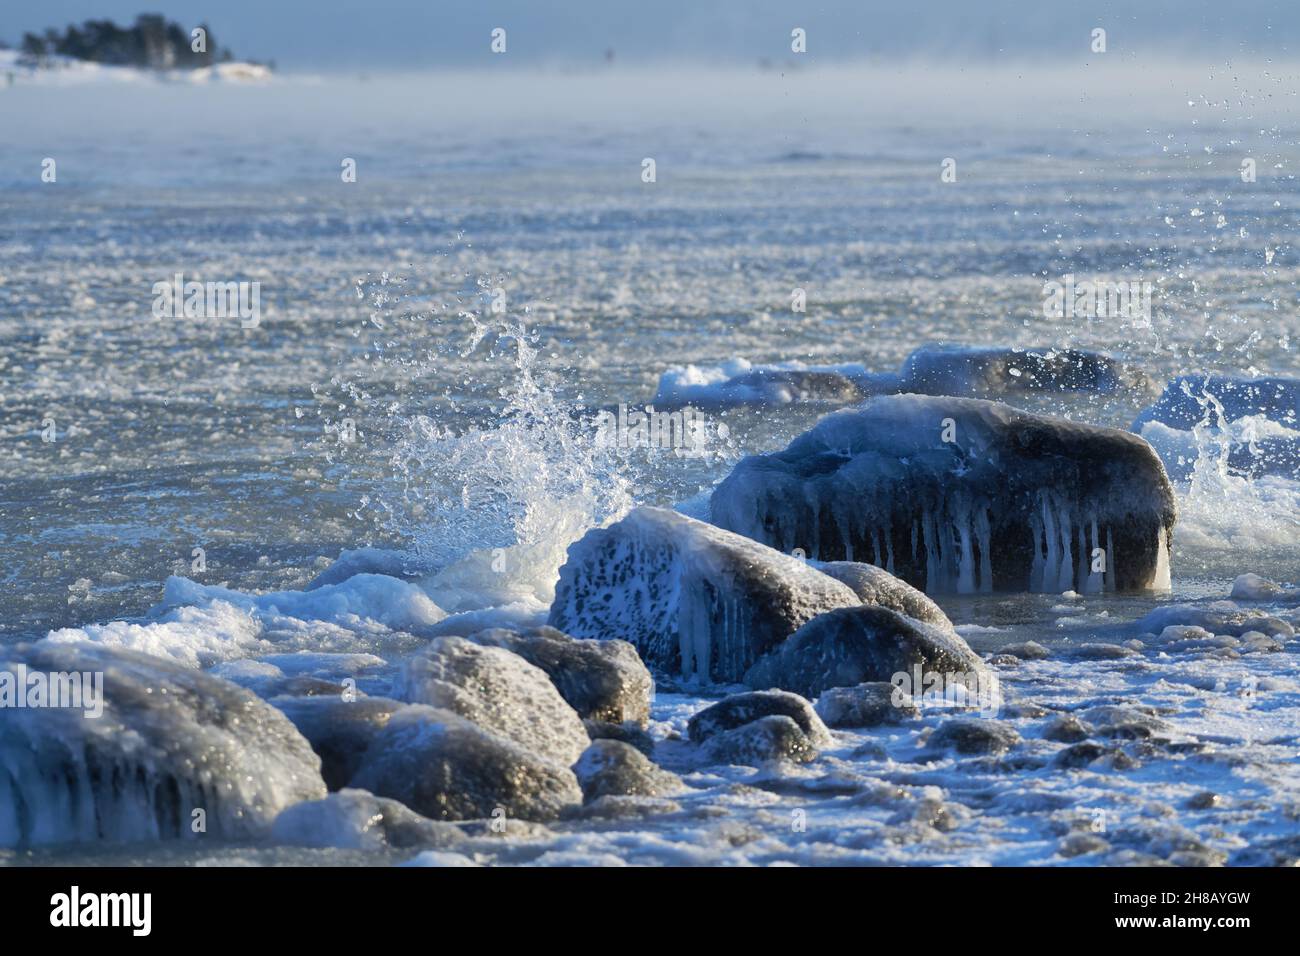 Ice covered rock by the Baltic Sea that about to freeze over with water splashing against the rocks in Helsinki, Finland on 14 January 2021. Stock Photo